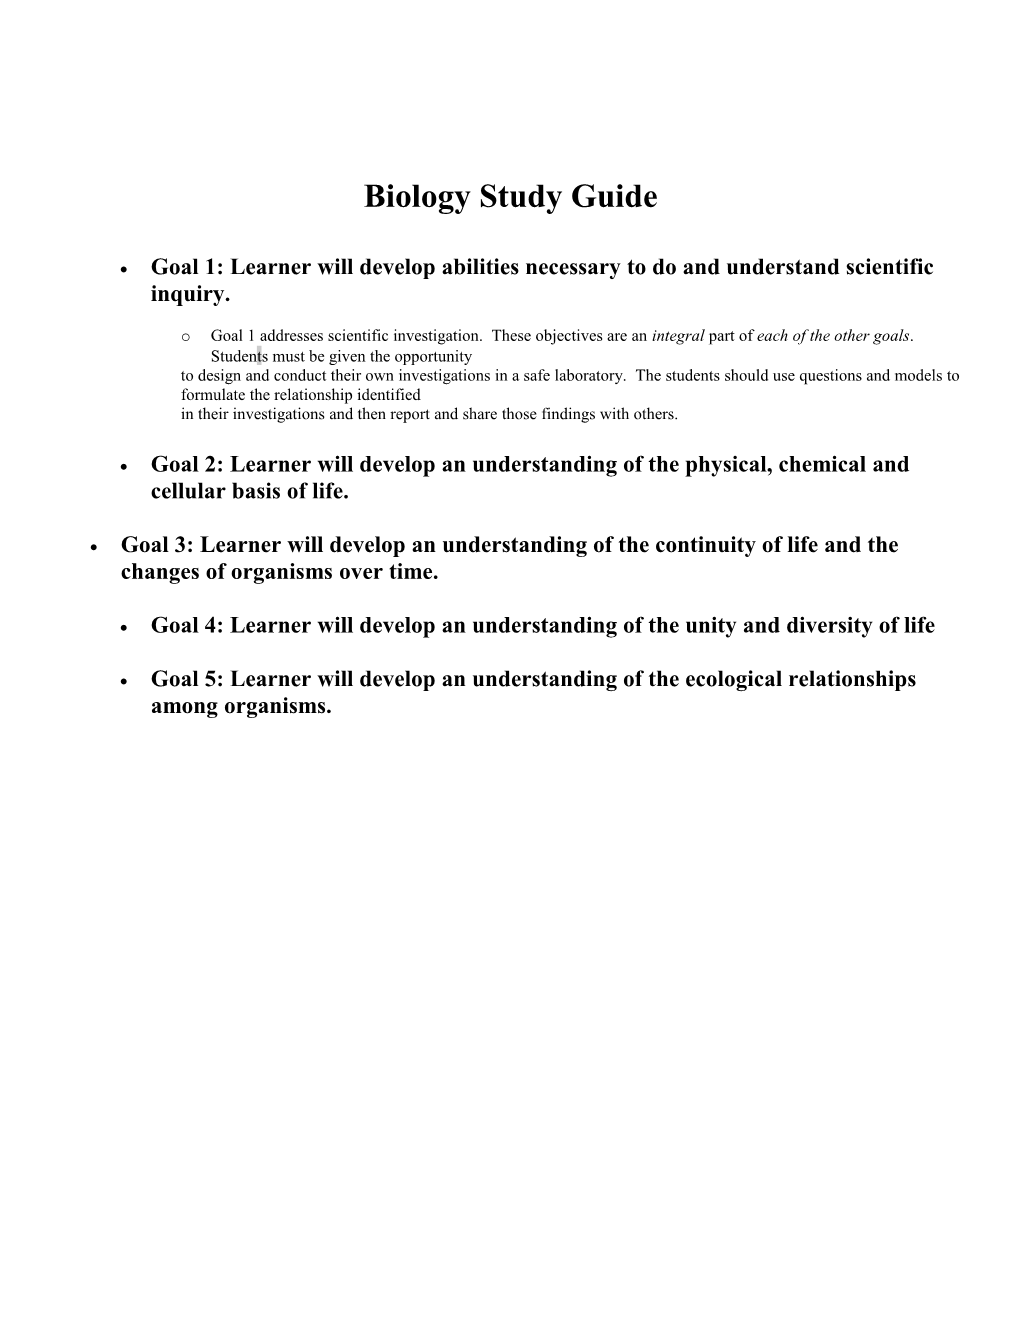 Biology Curriculum Pacing Guide and Study Guide